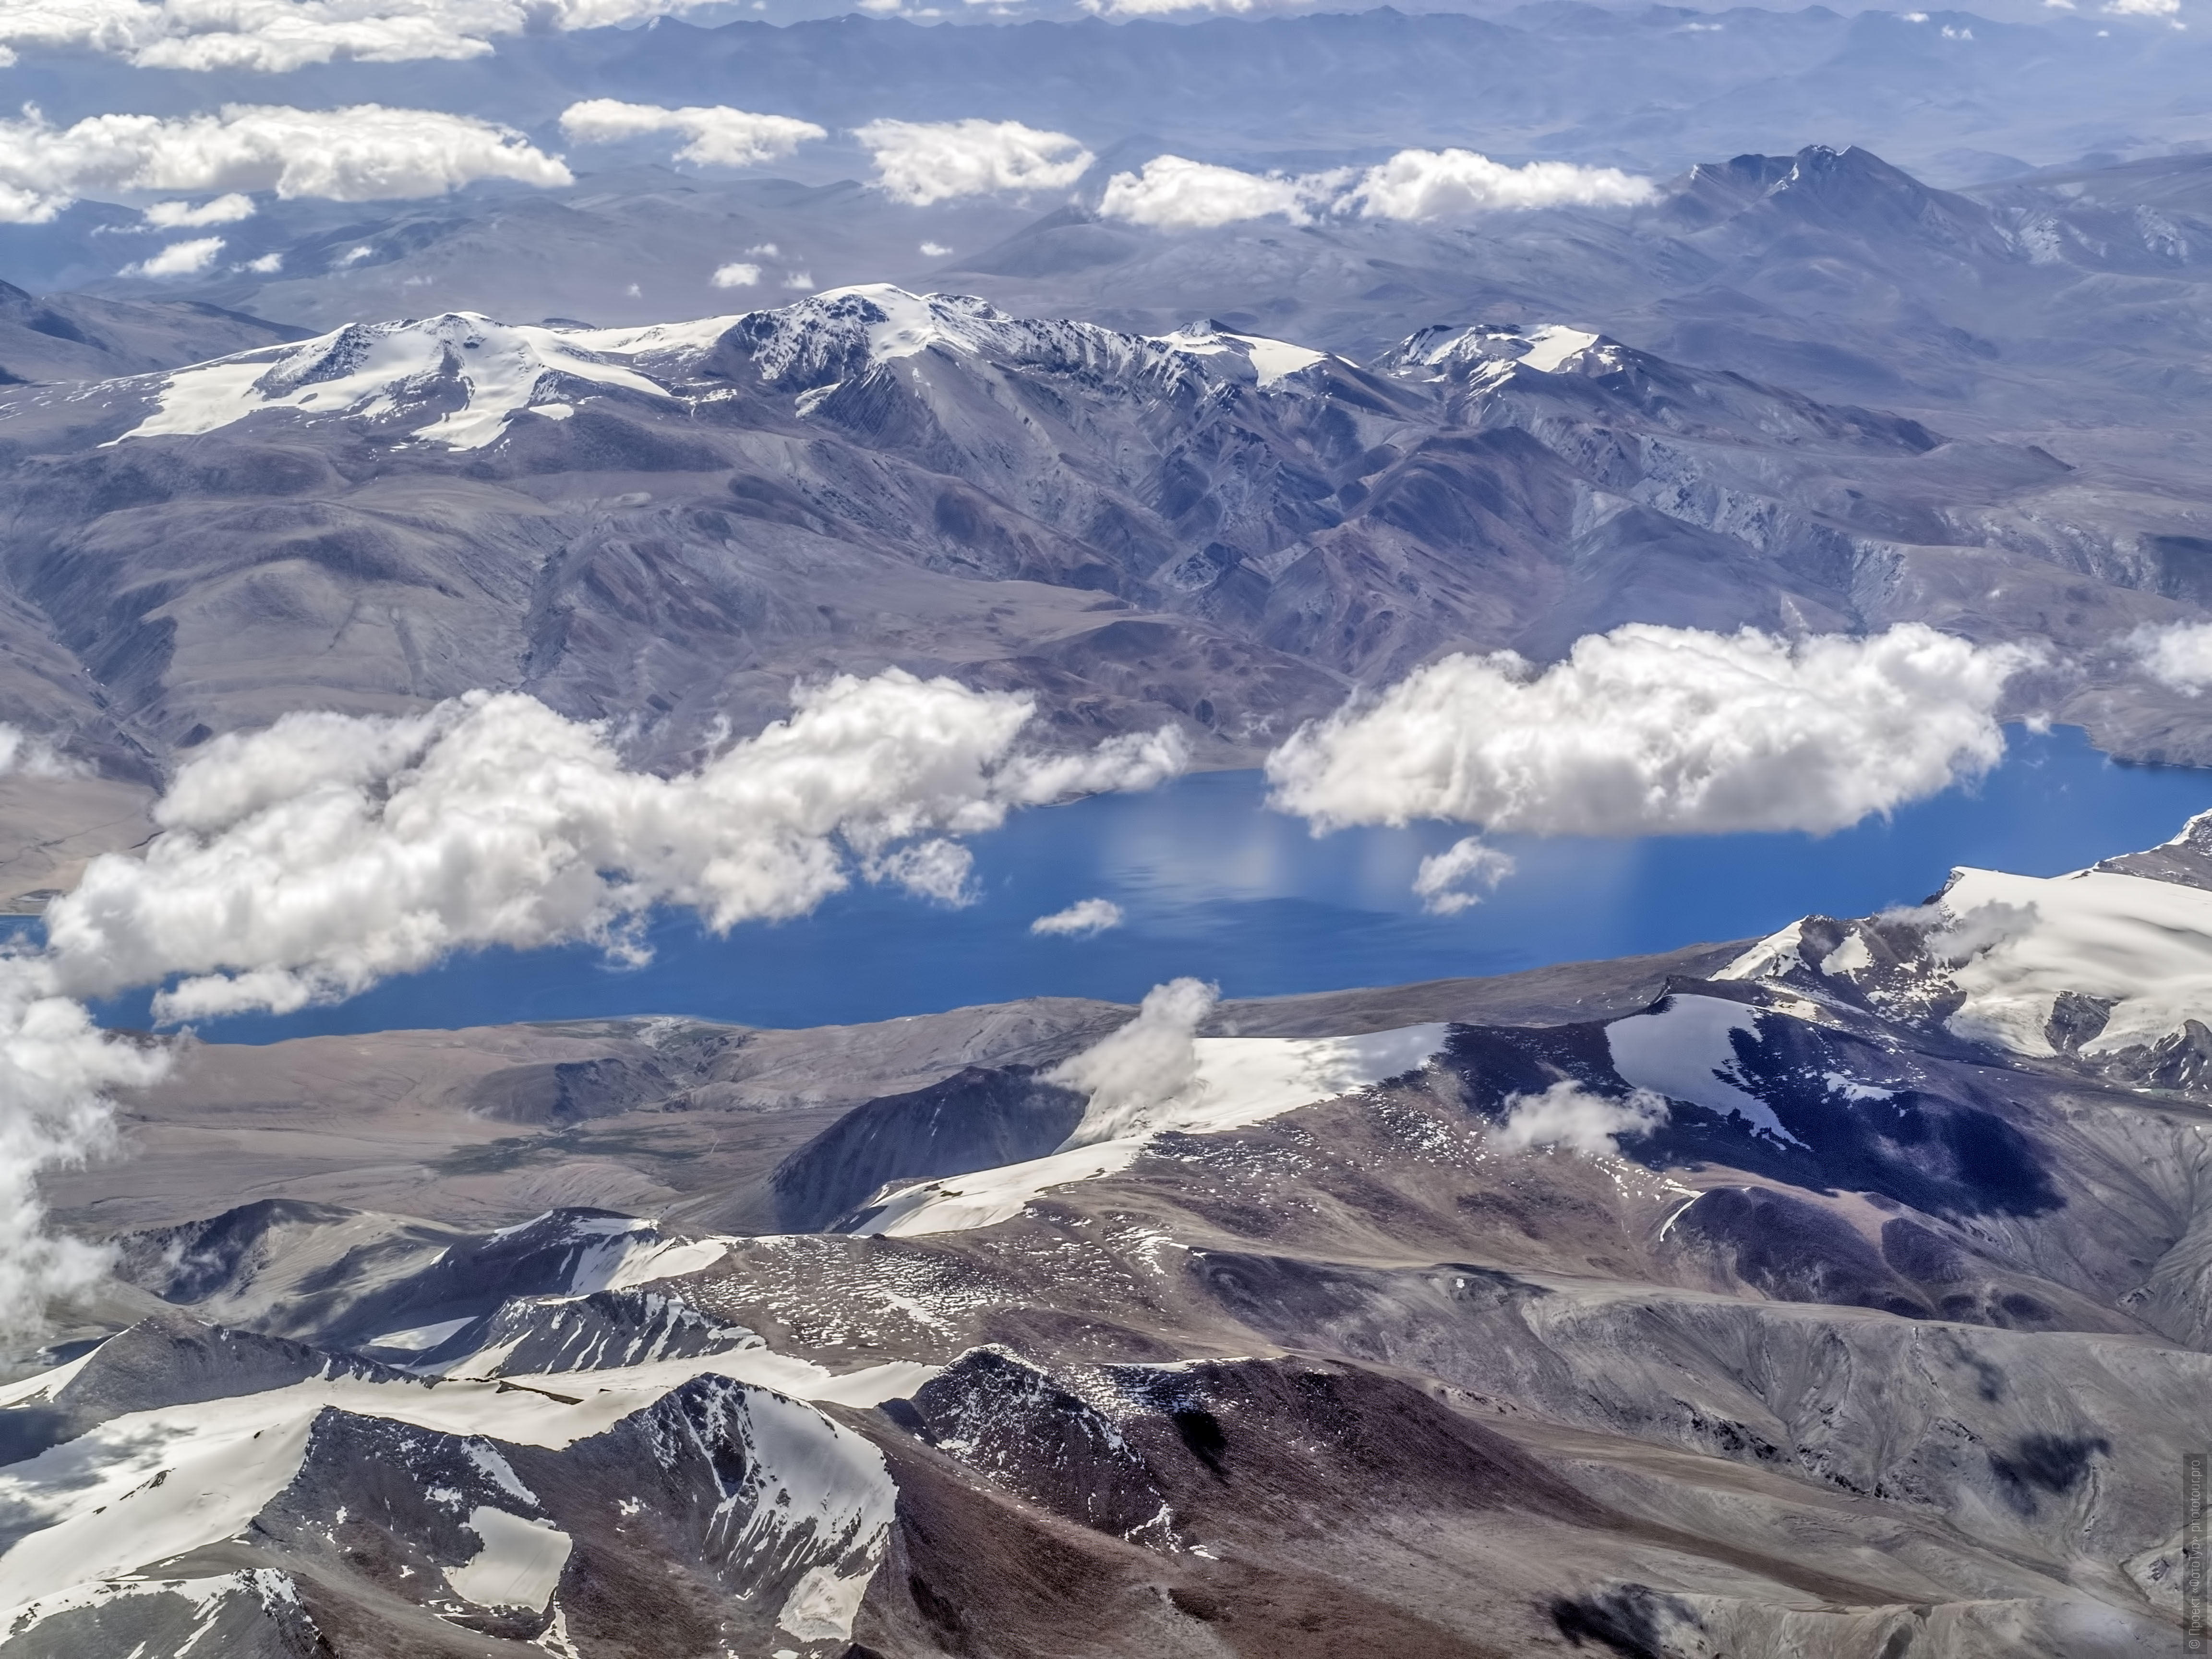 Lake Tso Moriri. Tour for artists in Tibet: Watercolor-1: Watercolor painting in Ladakh with Pavel Pugachev, 04.08. - 13.08. 2019.